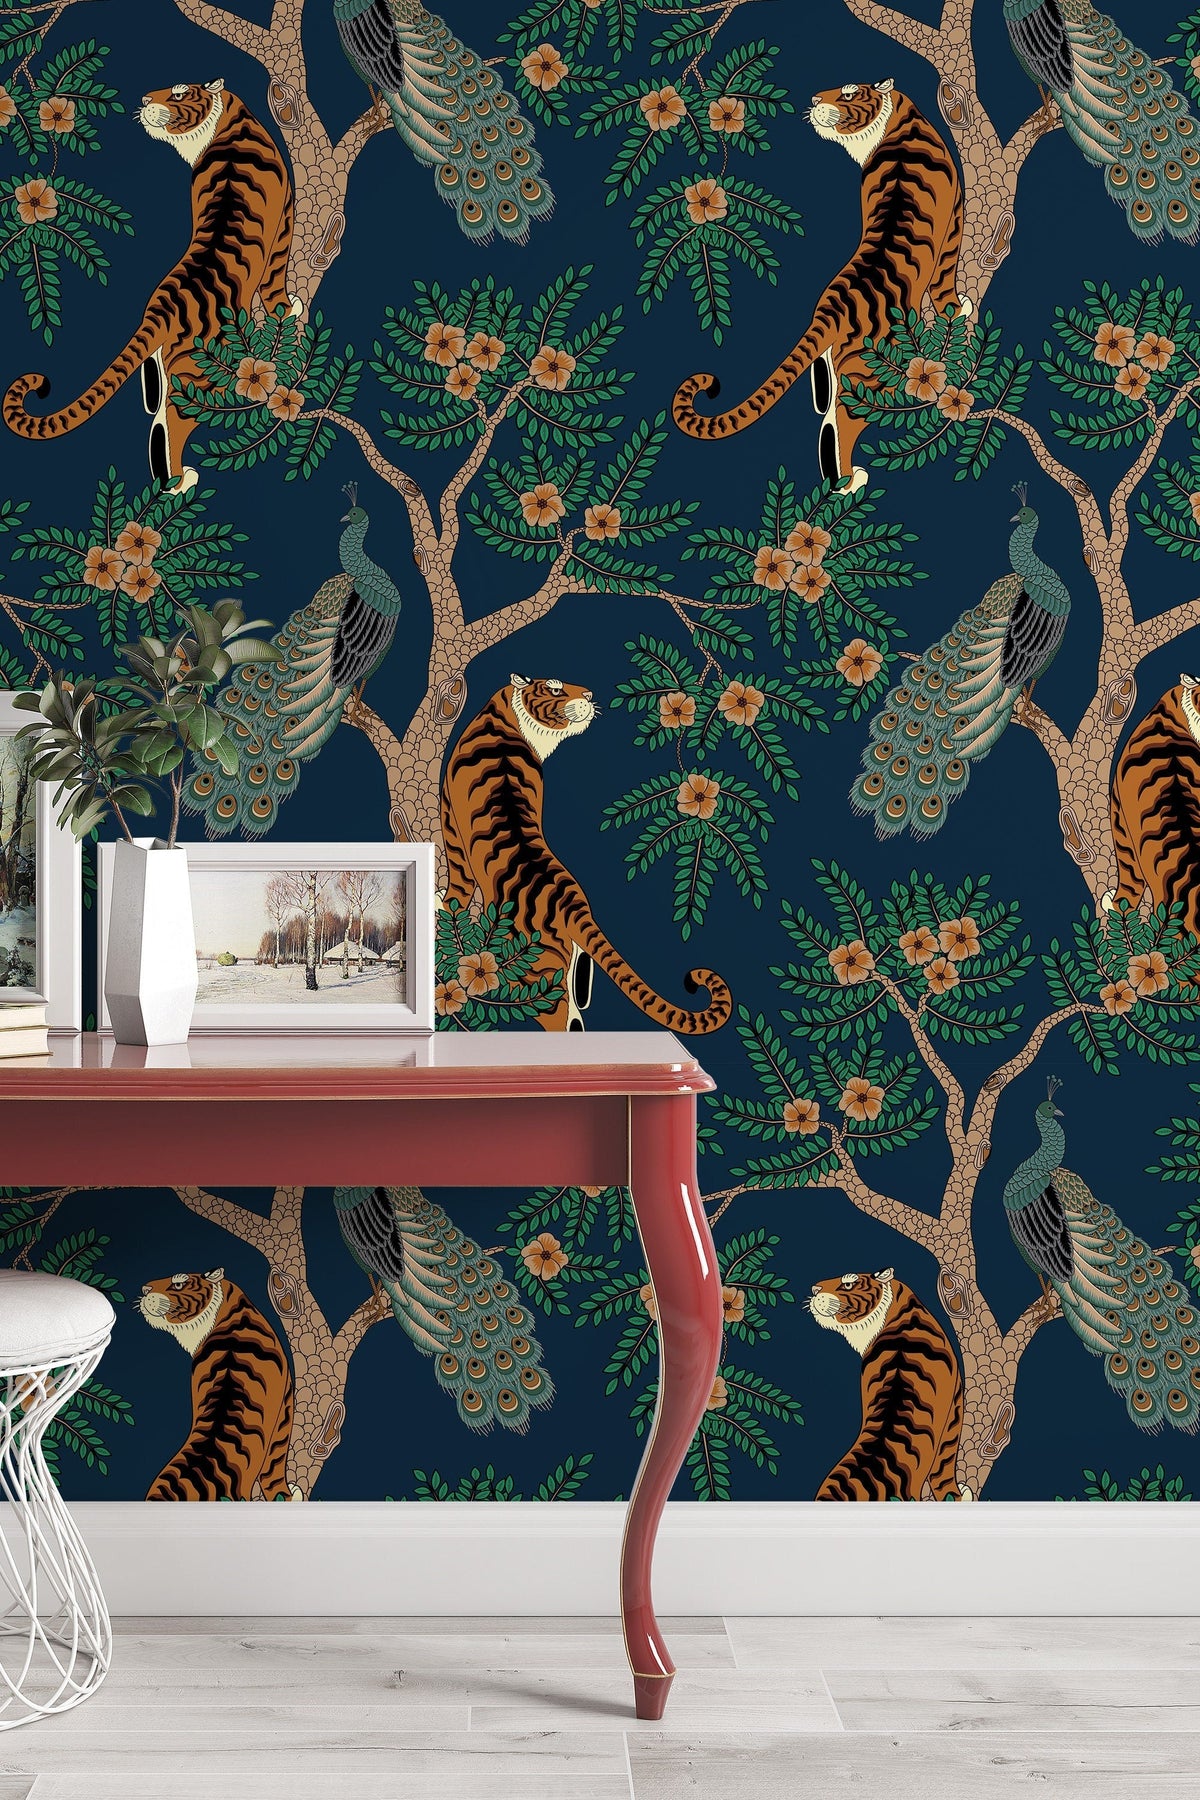 Tiger Peel and Stick Wallpaper  Removable Self adhesive Traditional